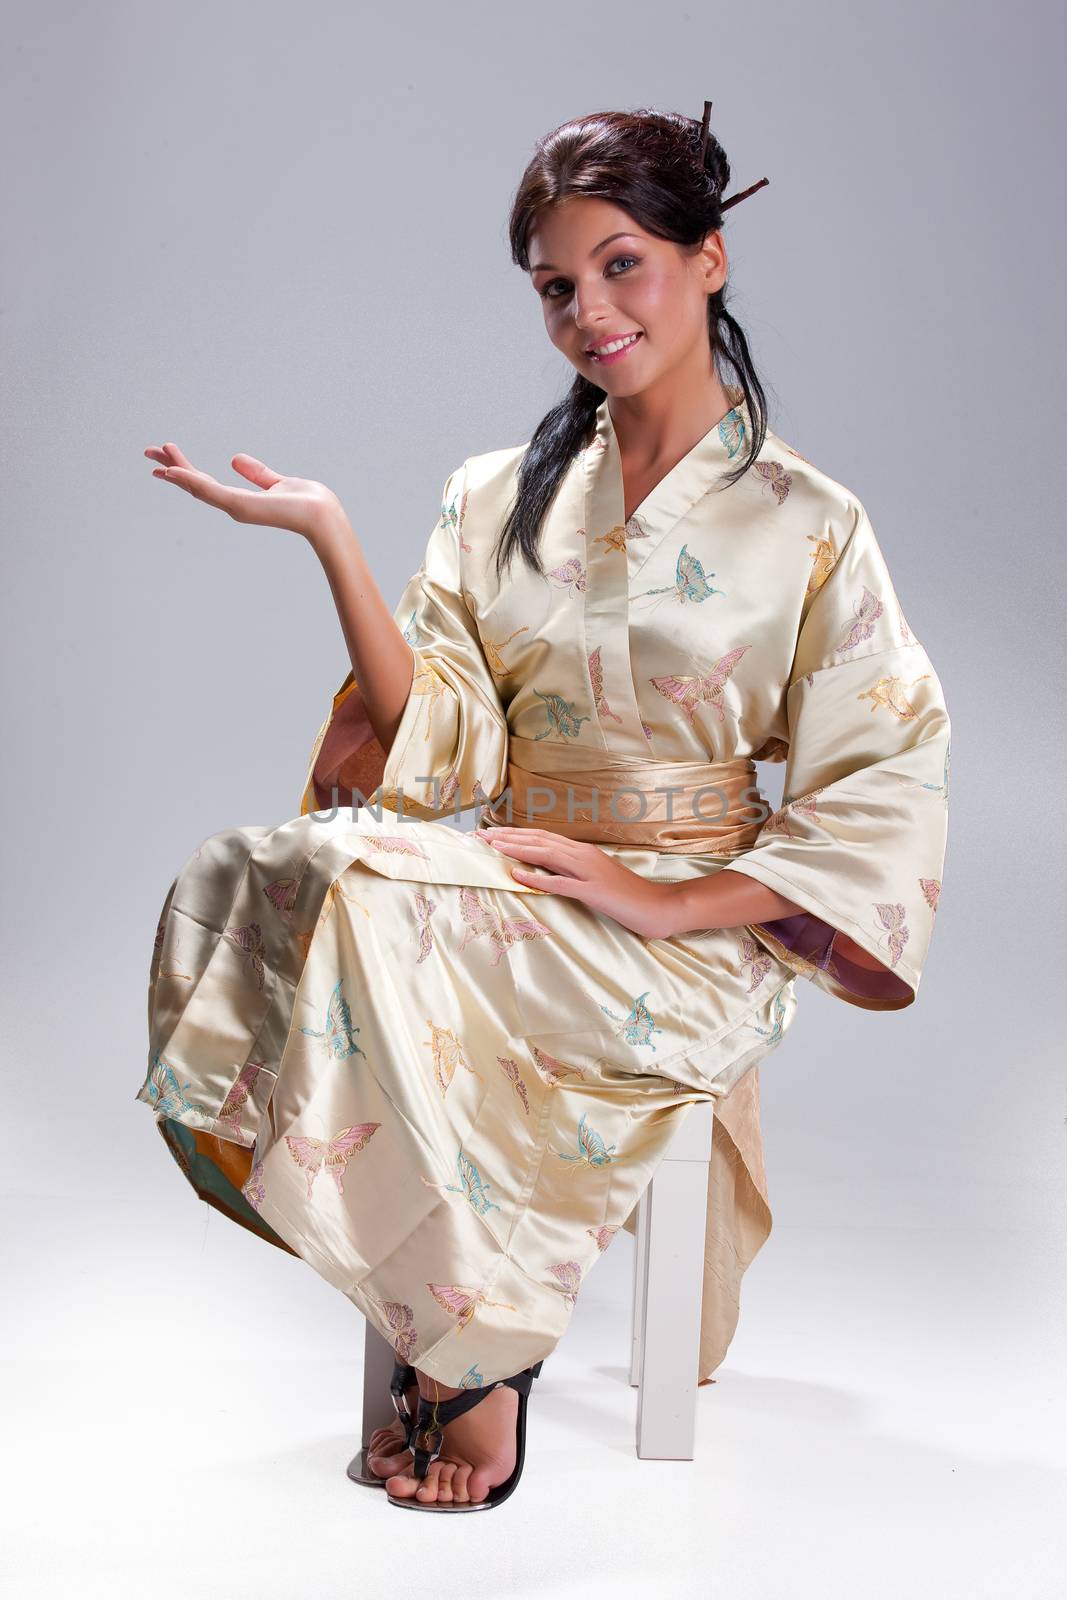 Young beautiful woman in japanese national clothing on an isolated studio background